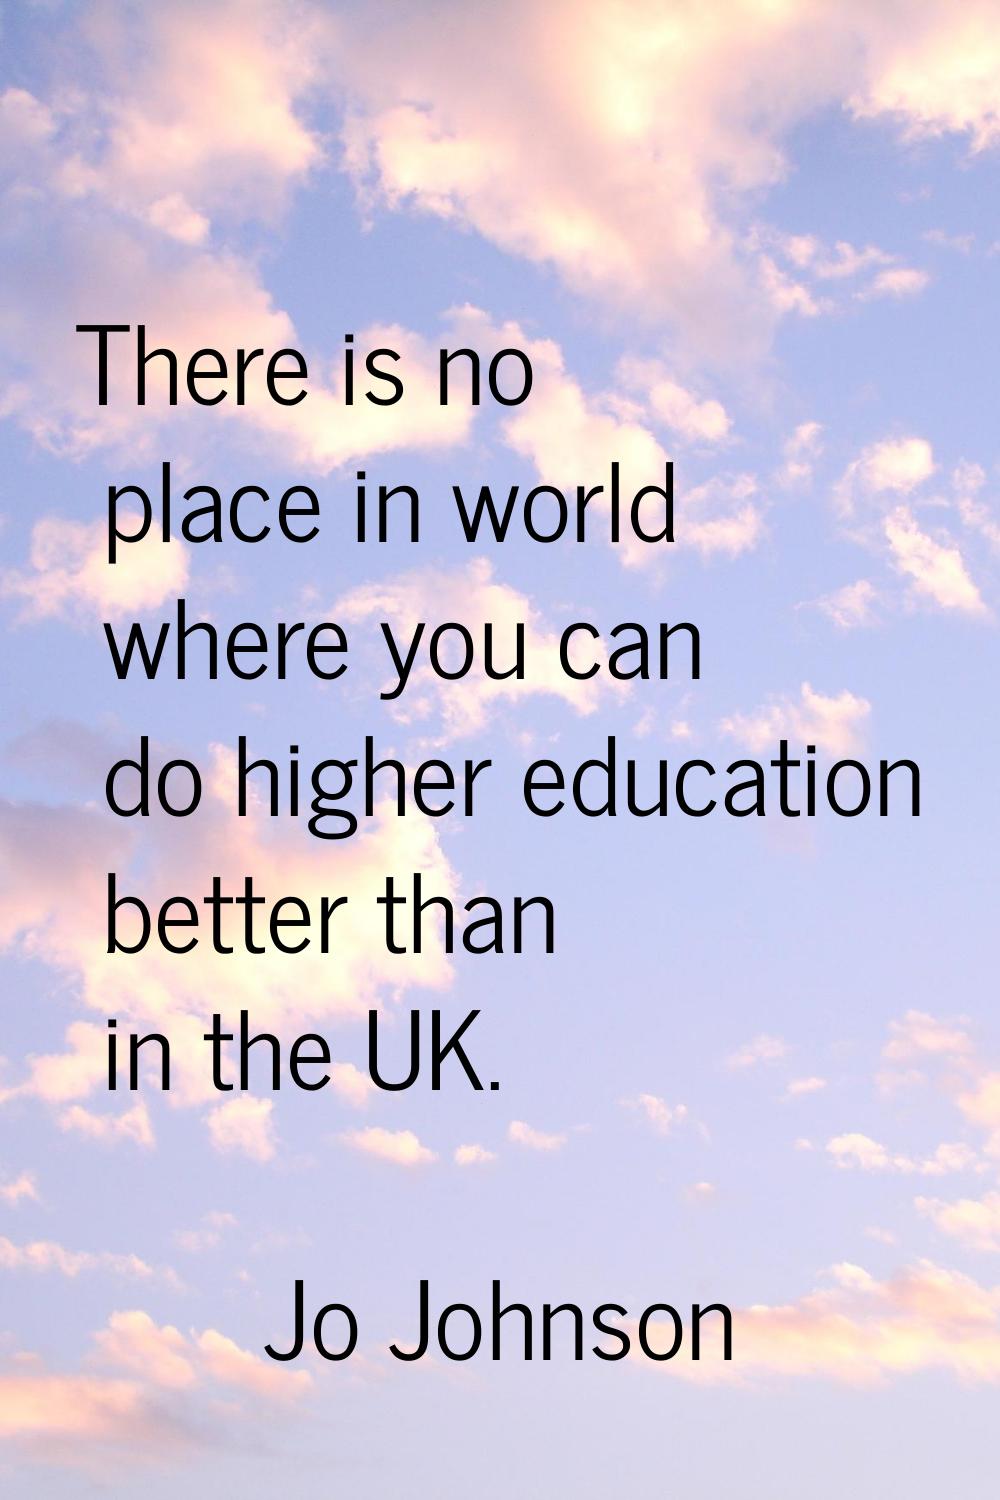 There is no place in world where you can do higher education better than in the UK.